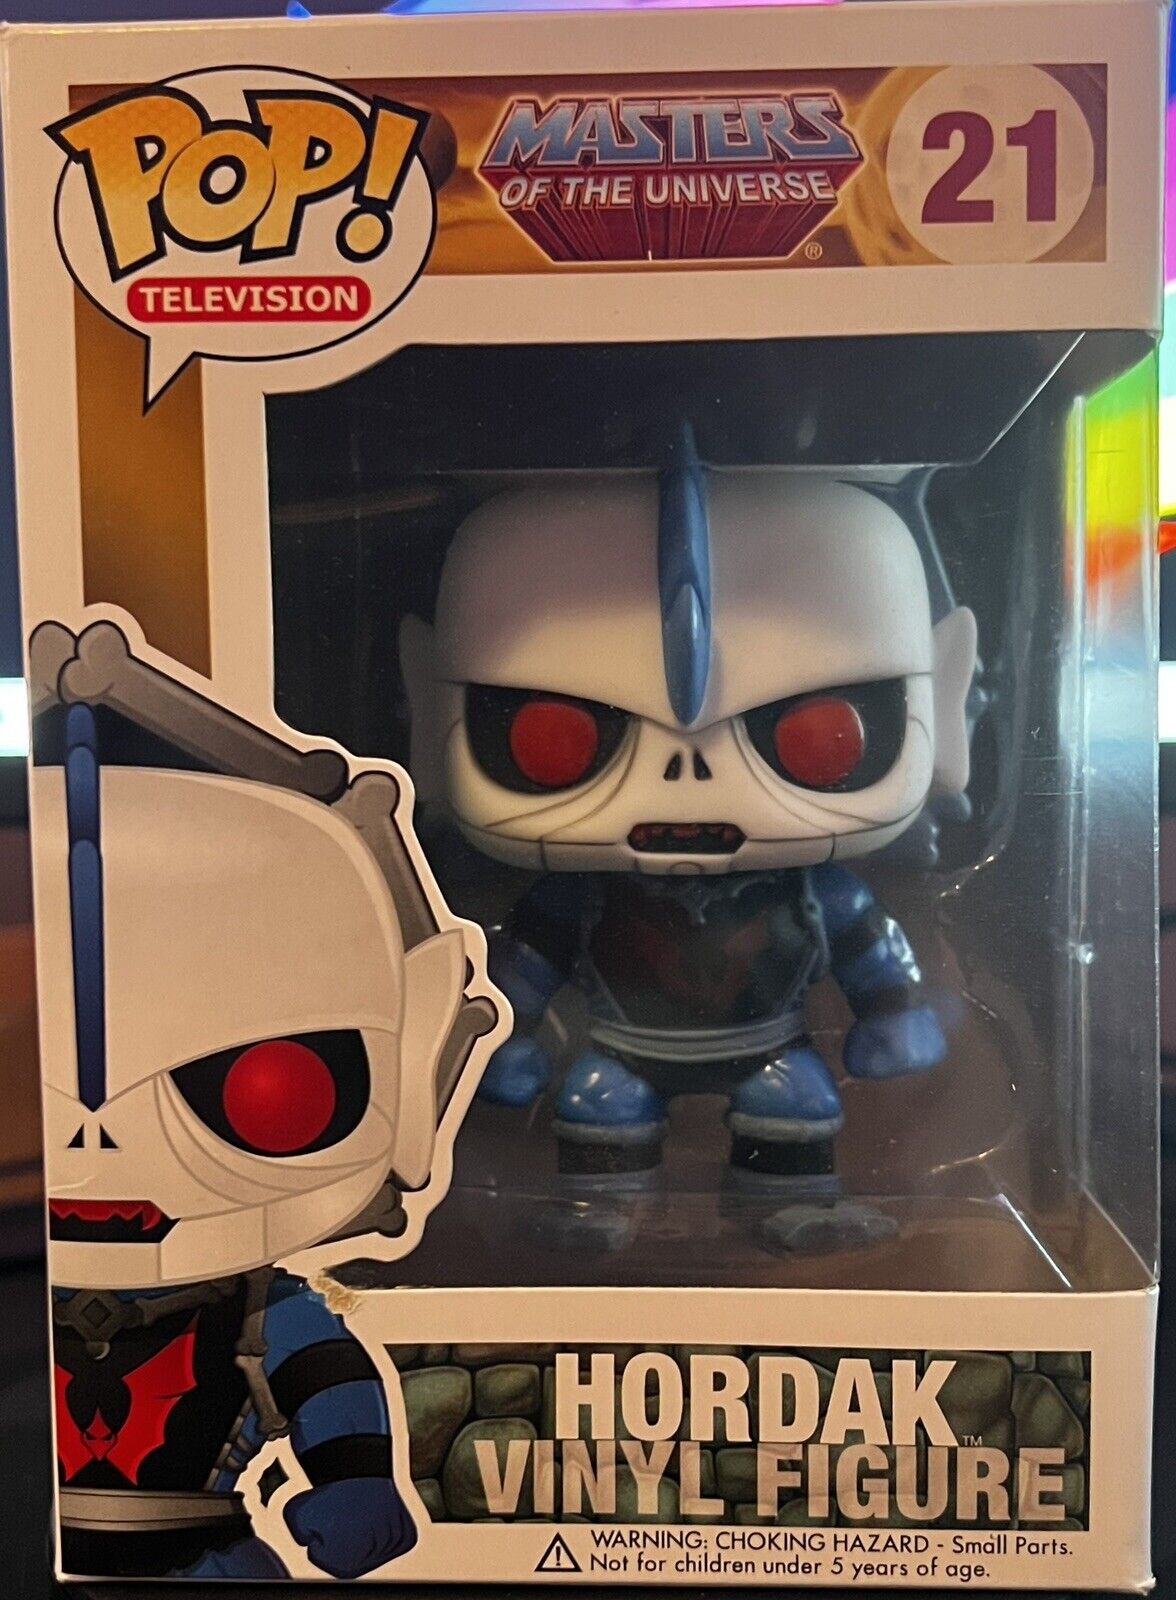 Hordak #21 Masters of the Universe -Funko Pop Television